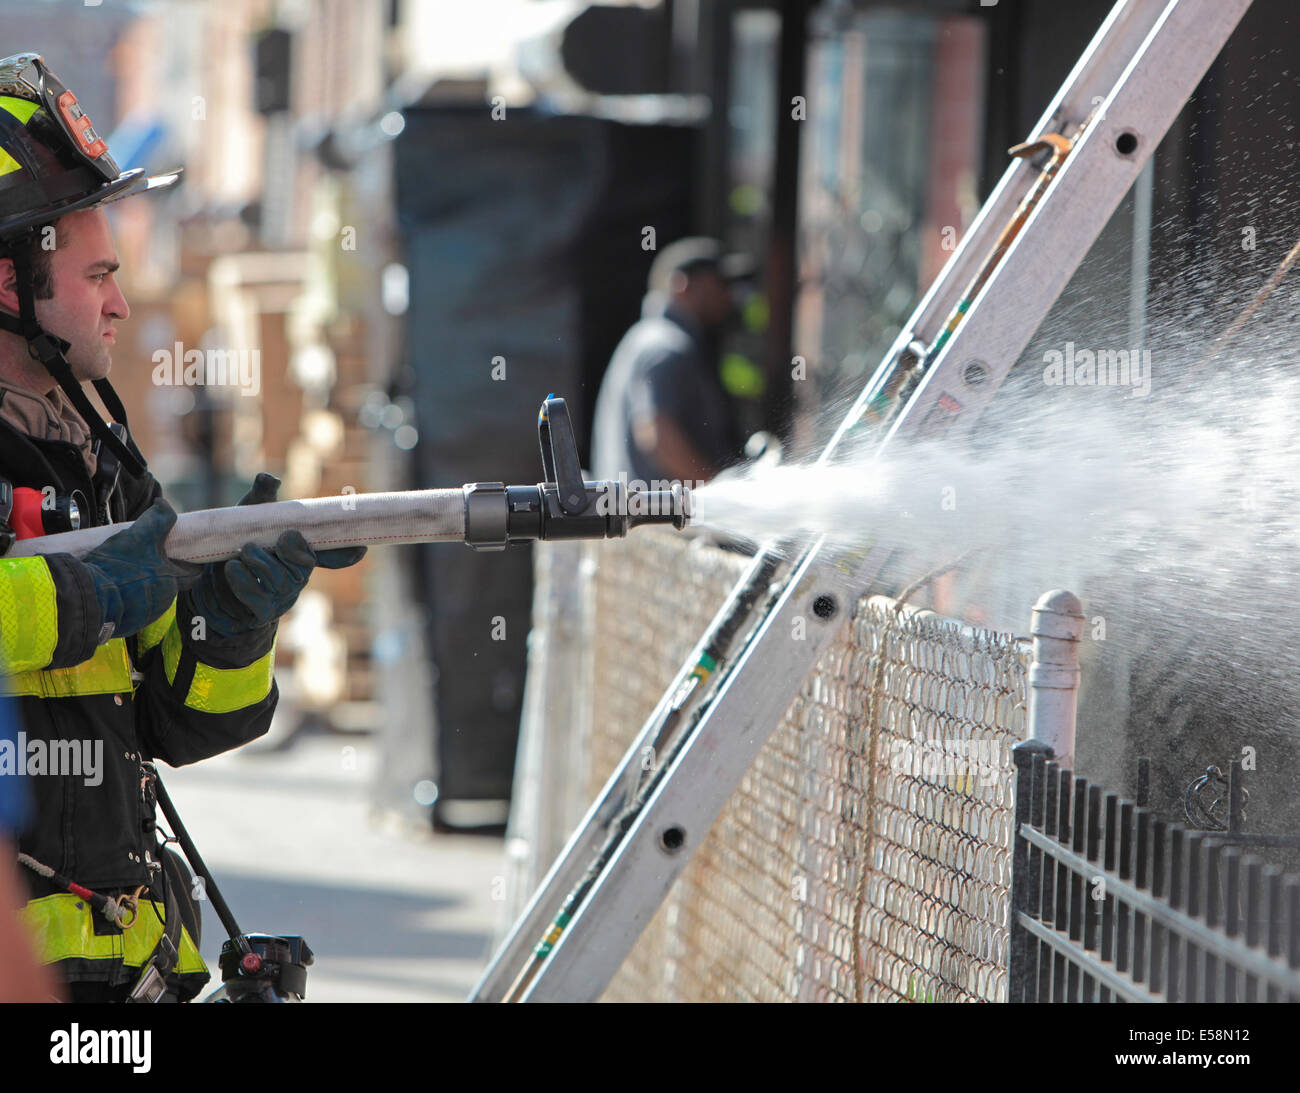 New York City - Firefighter uses hose to spray high pressure water on residential fire in Gowanus, Brooklyn Stock Photo